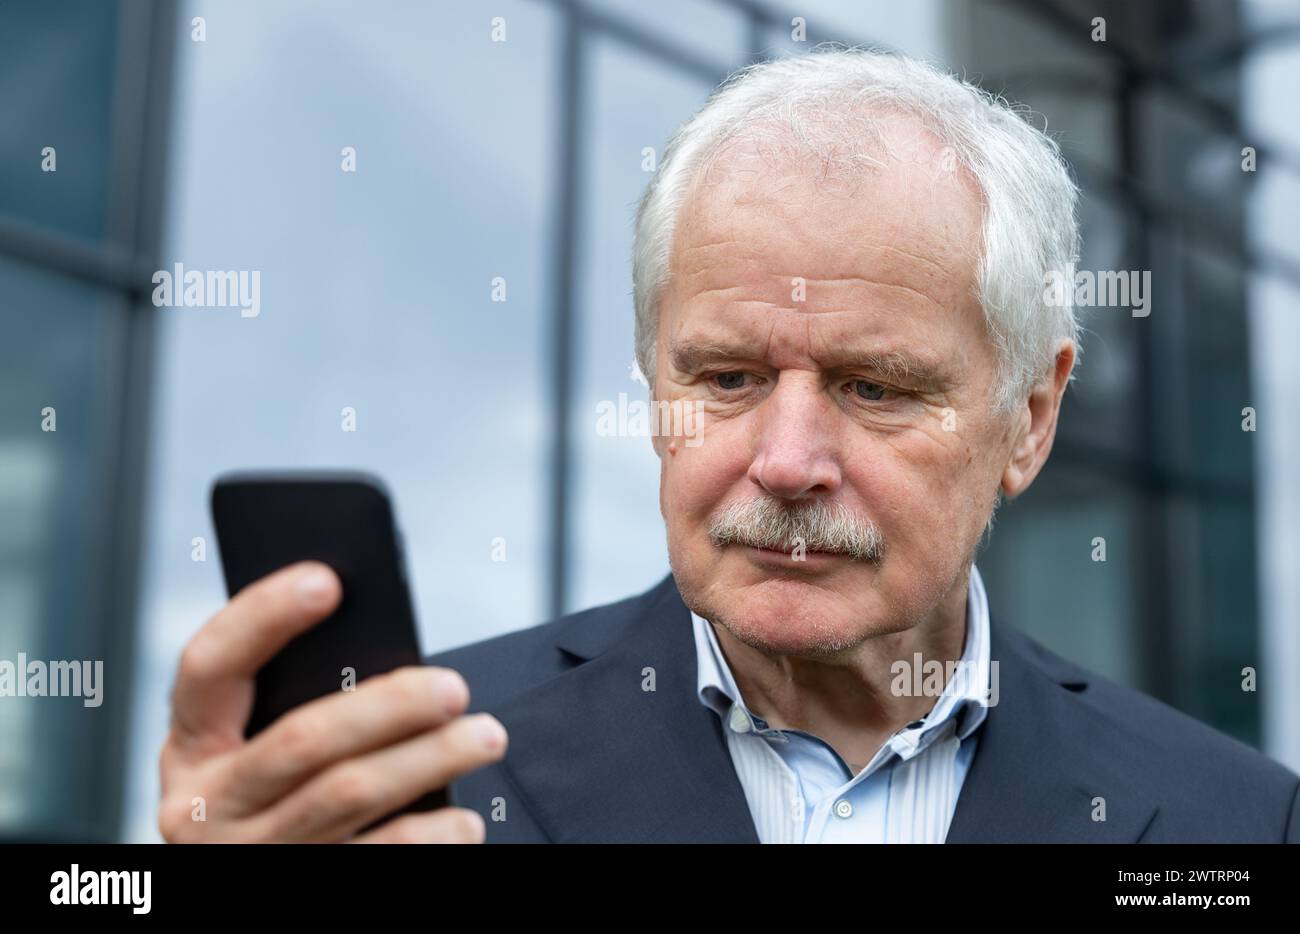 Senior Business man in a suit looking concentrated at his mobile phone Stock Photo